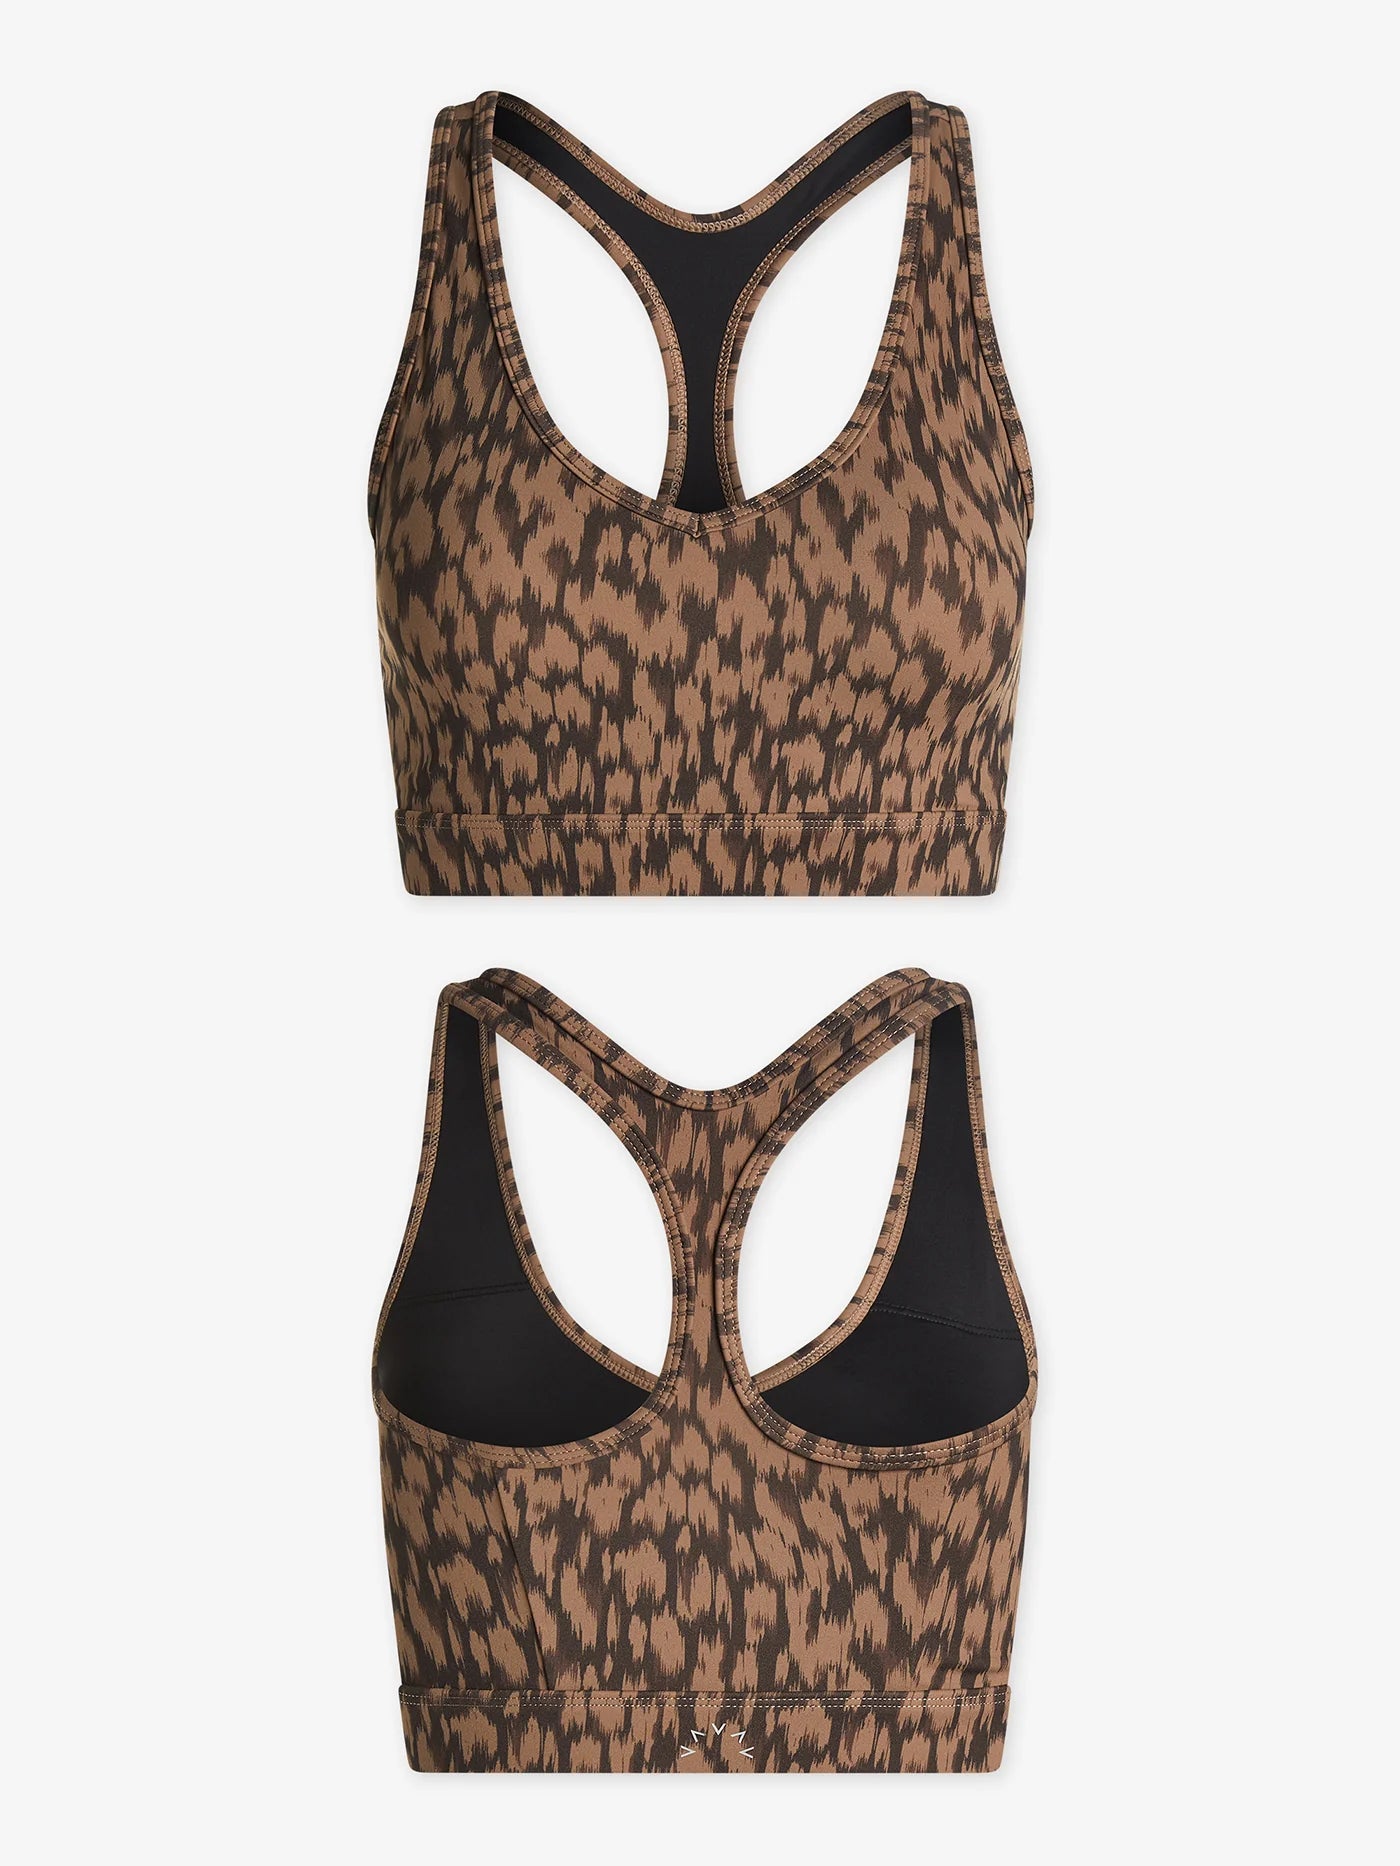 FORM PARK BRA | COCOA ETCHED ANIMAL